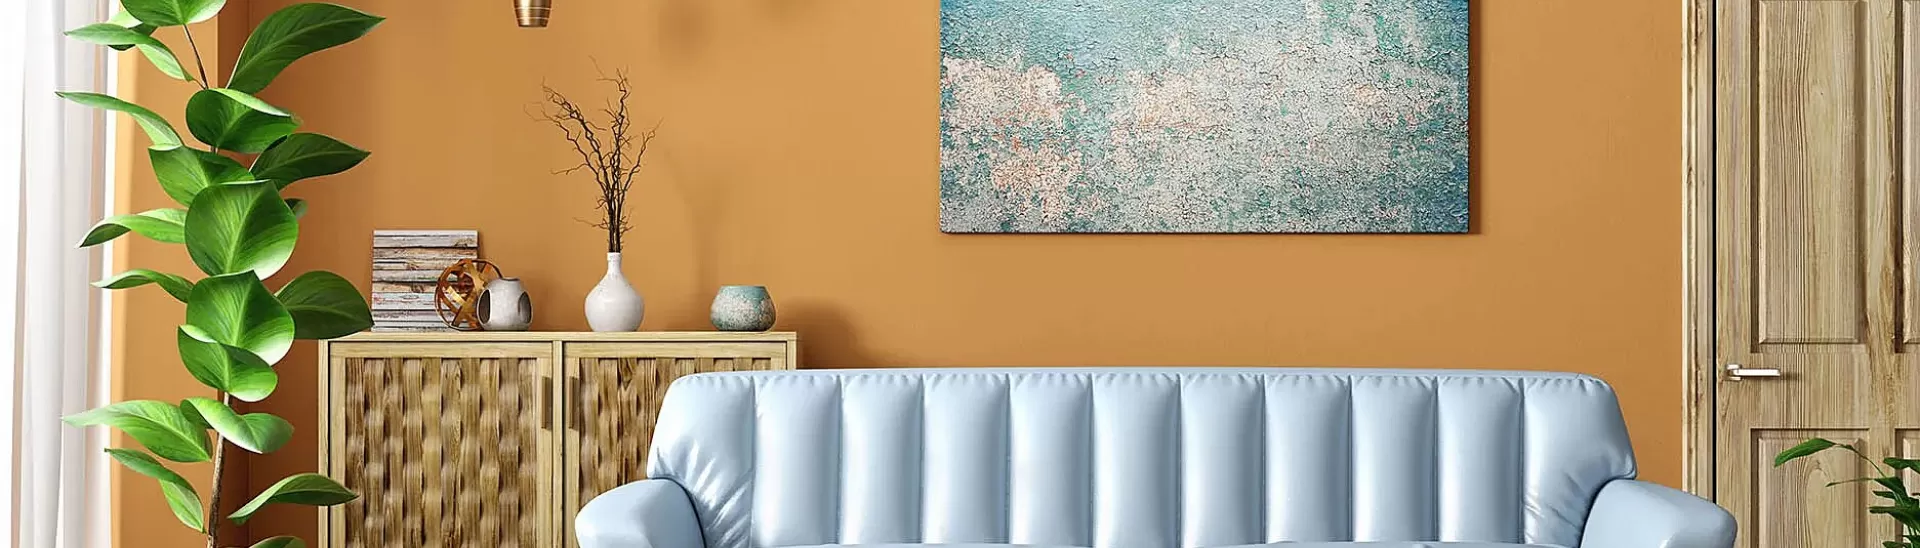 Top 10 Wall Colour Combination for Your Home with Images - Nerolac